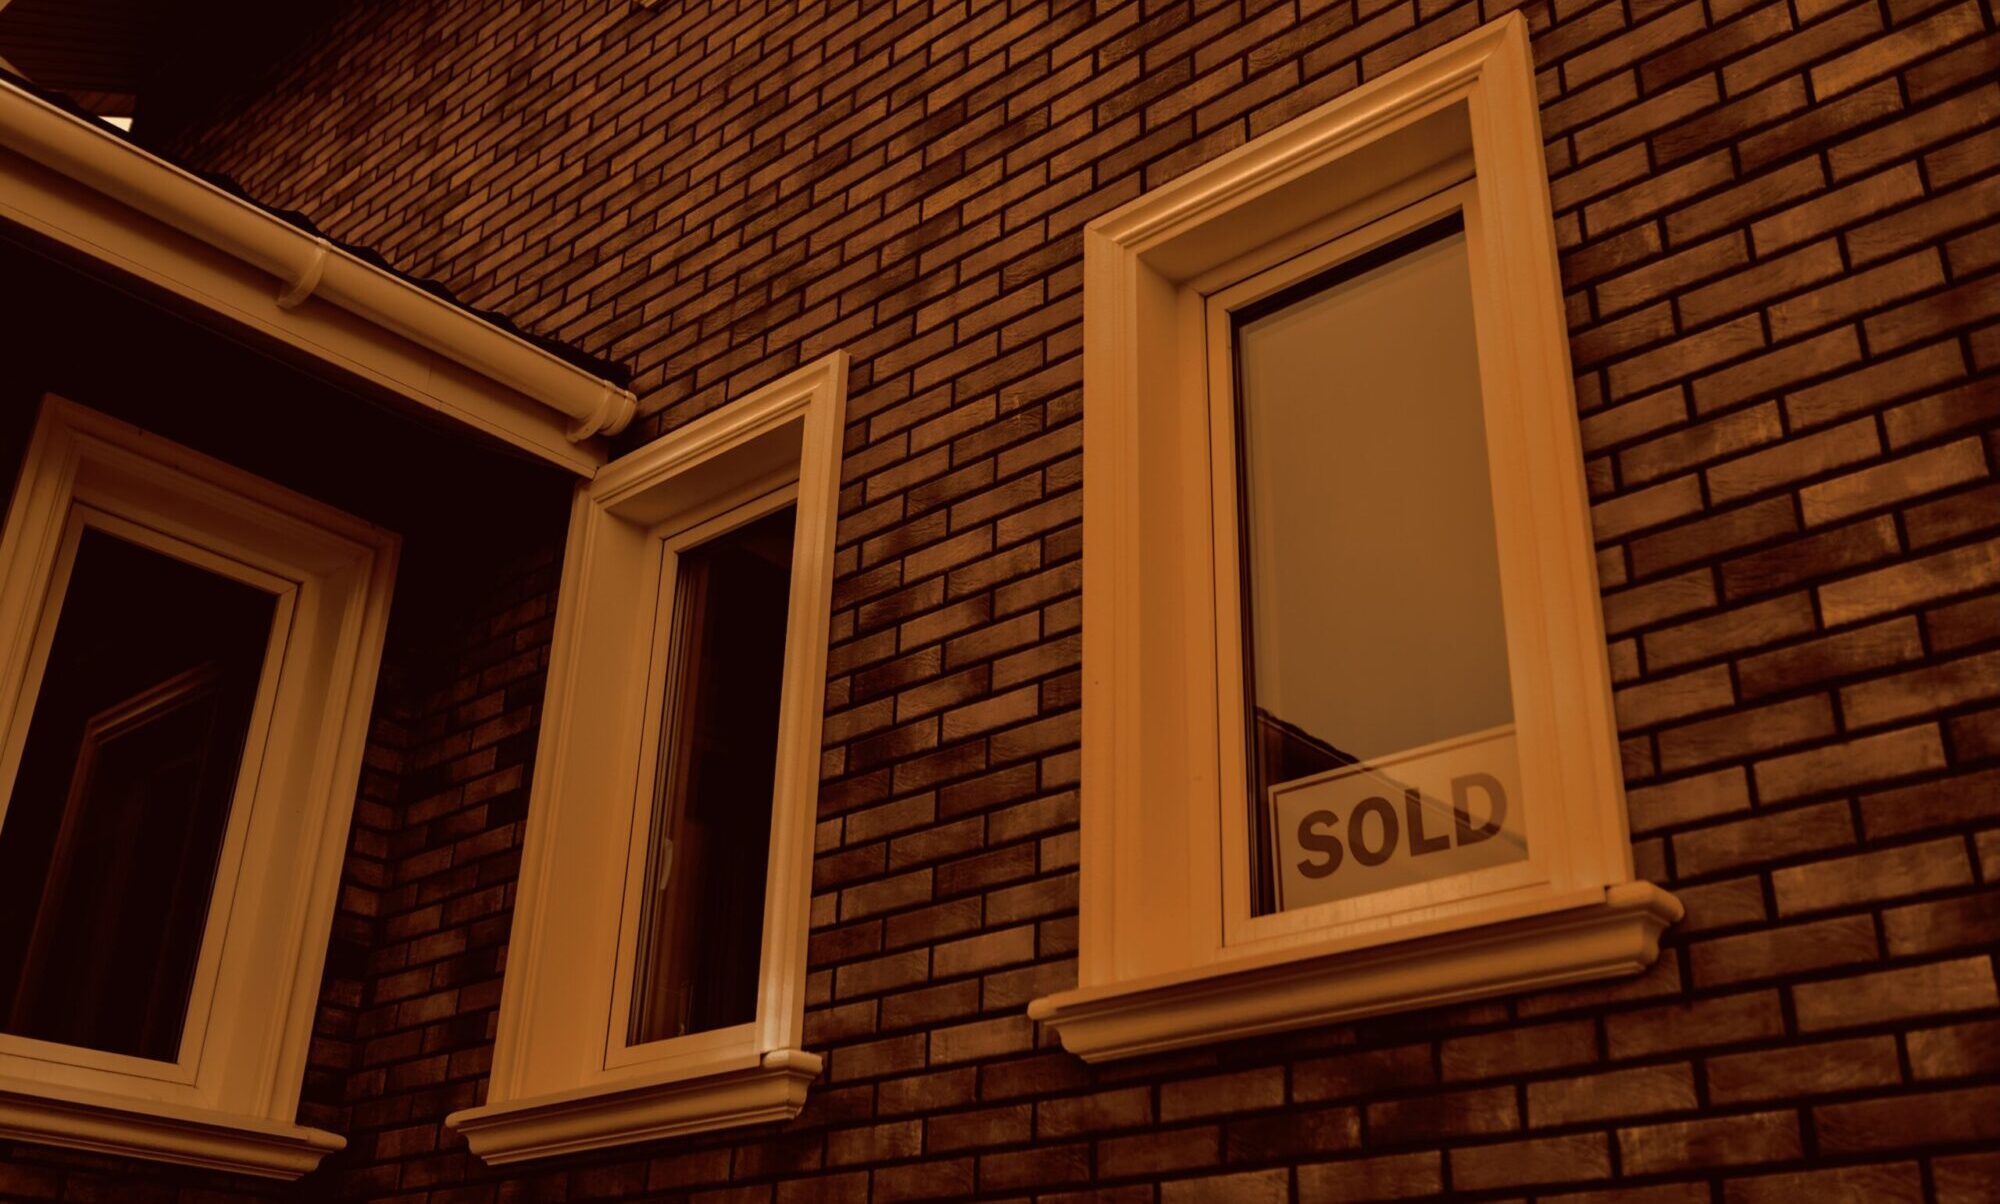 House with sold sign in the window